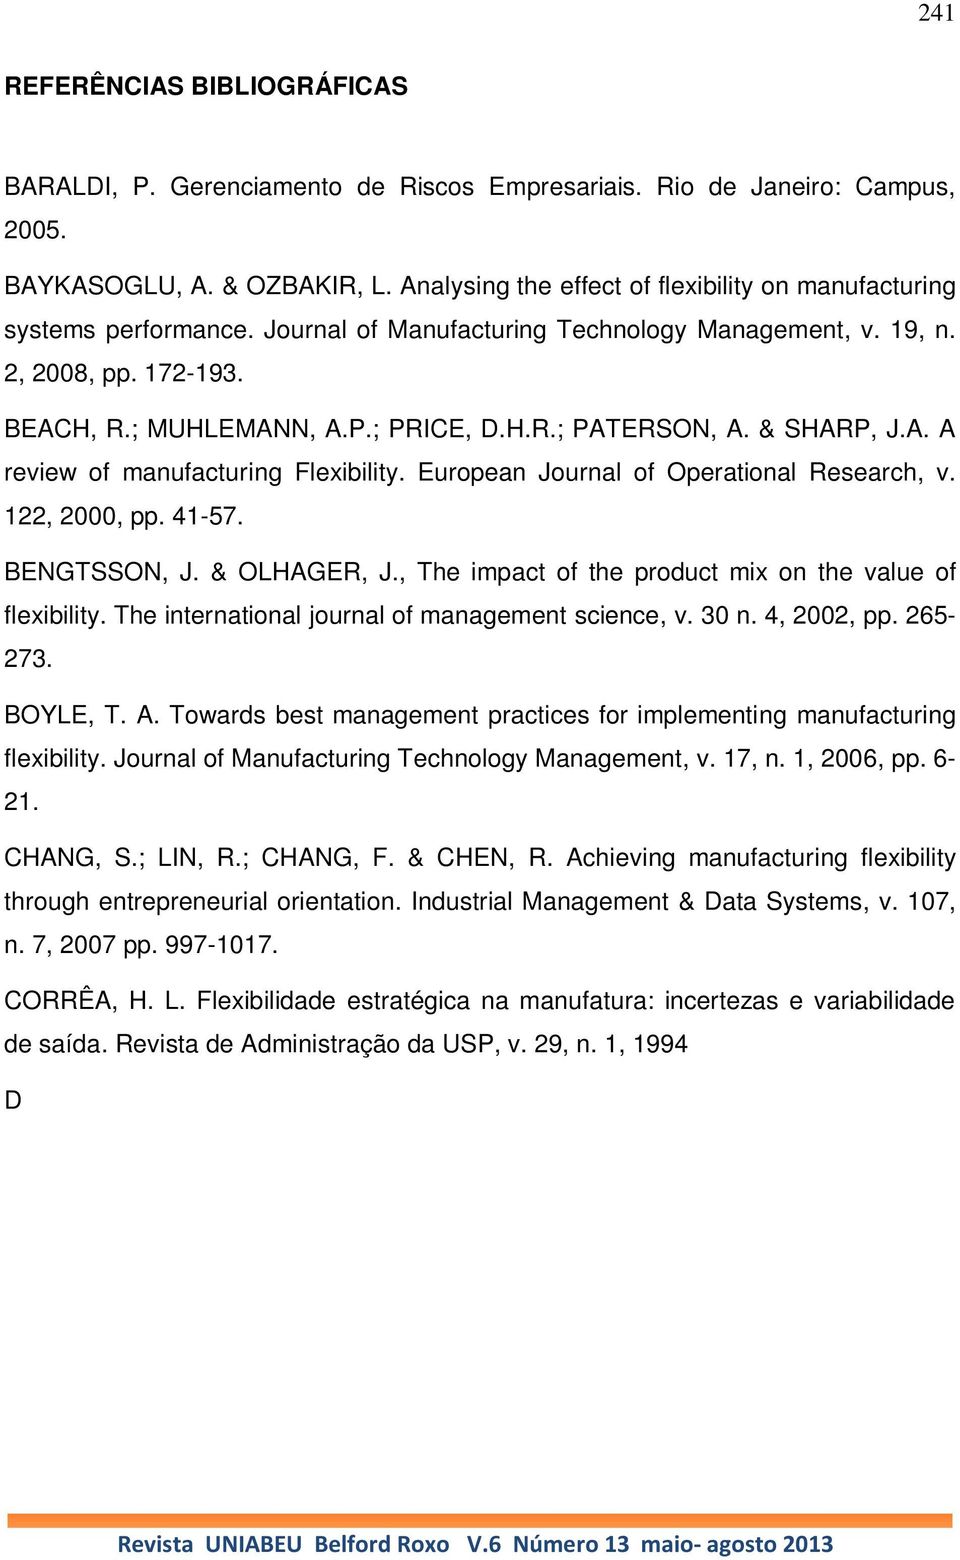 & SHARP, J.A. A review of manufacturing Flexibility. European Journal of Operational Research, v. 122, 2000, pp. 41-57. BENGTSSON, J. & OLHAGER, J.